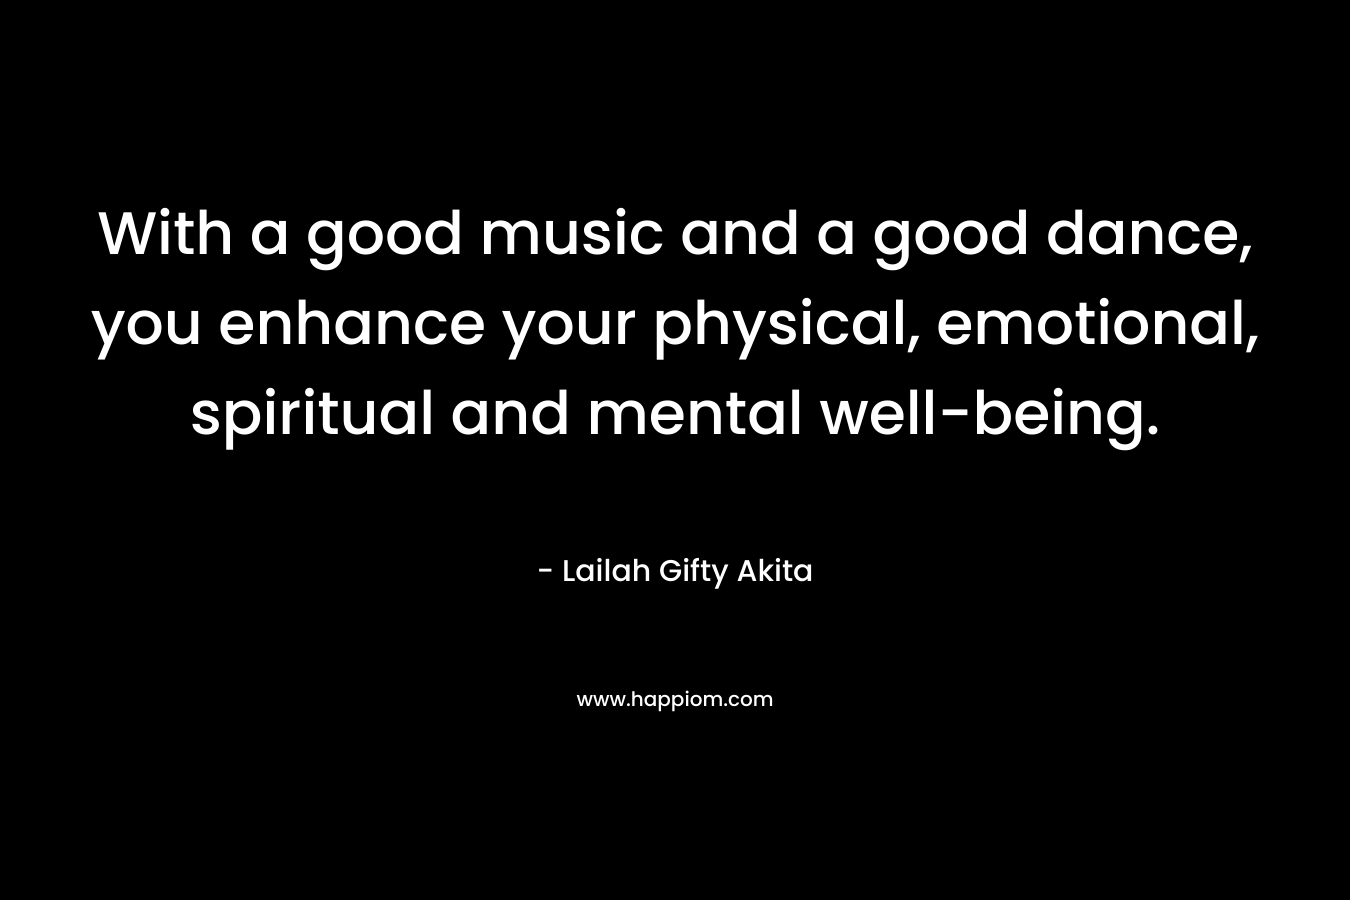 With a good music and a good dance, you enhance your physical, emotional, spiritual and mental well-being.